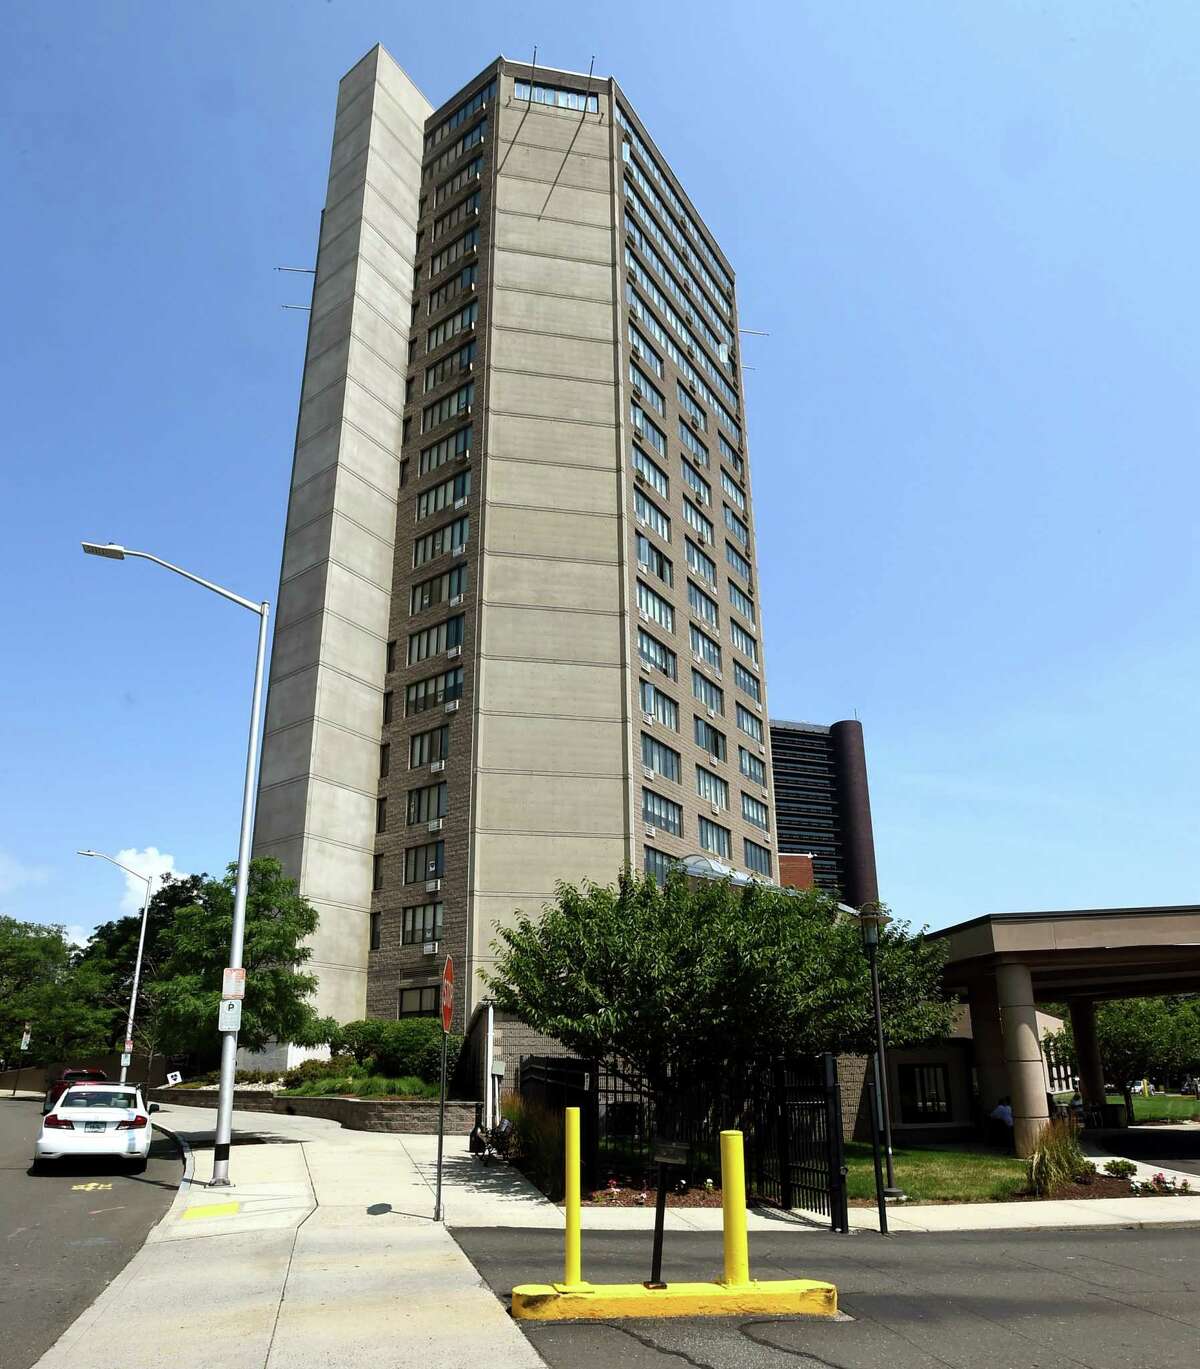 New Haven, Connecticut - Thursday, July 9, 2020: Tower One Tower East assisted living facility in New Haven.